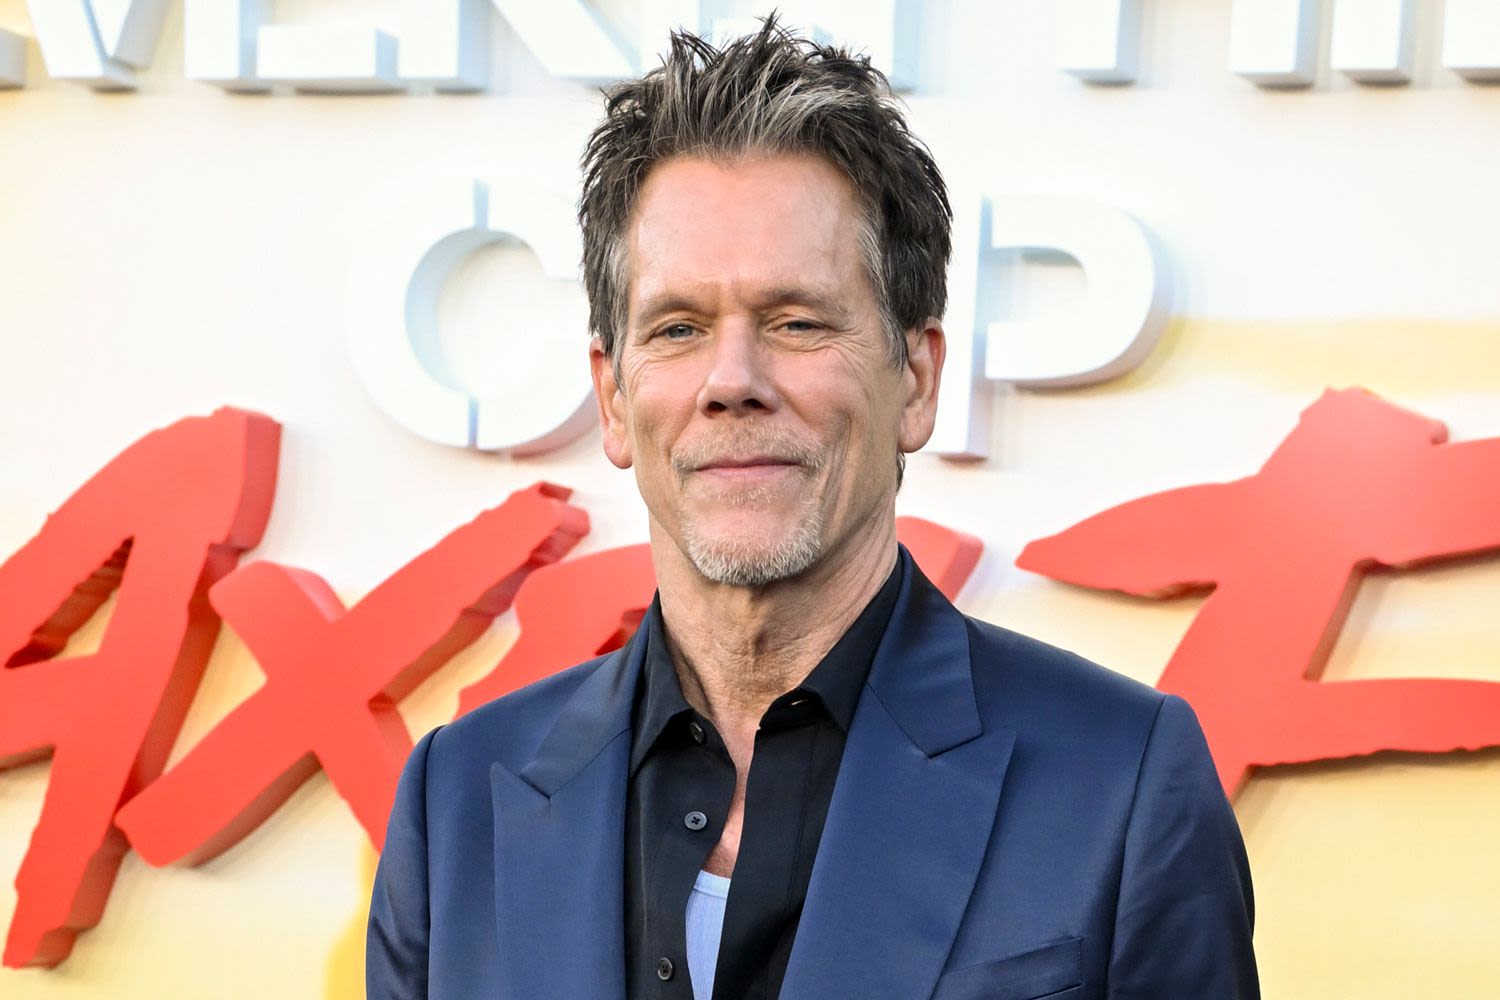 Kevin Bacon Posts Shirtless Photo as He Rings in His Latest Birthday: 'This Is 66'